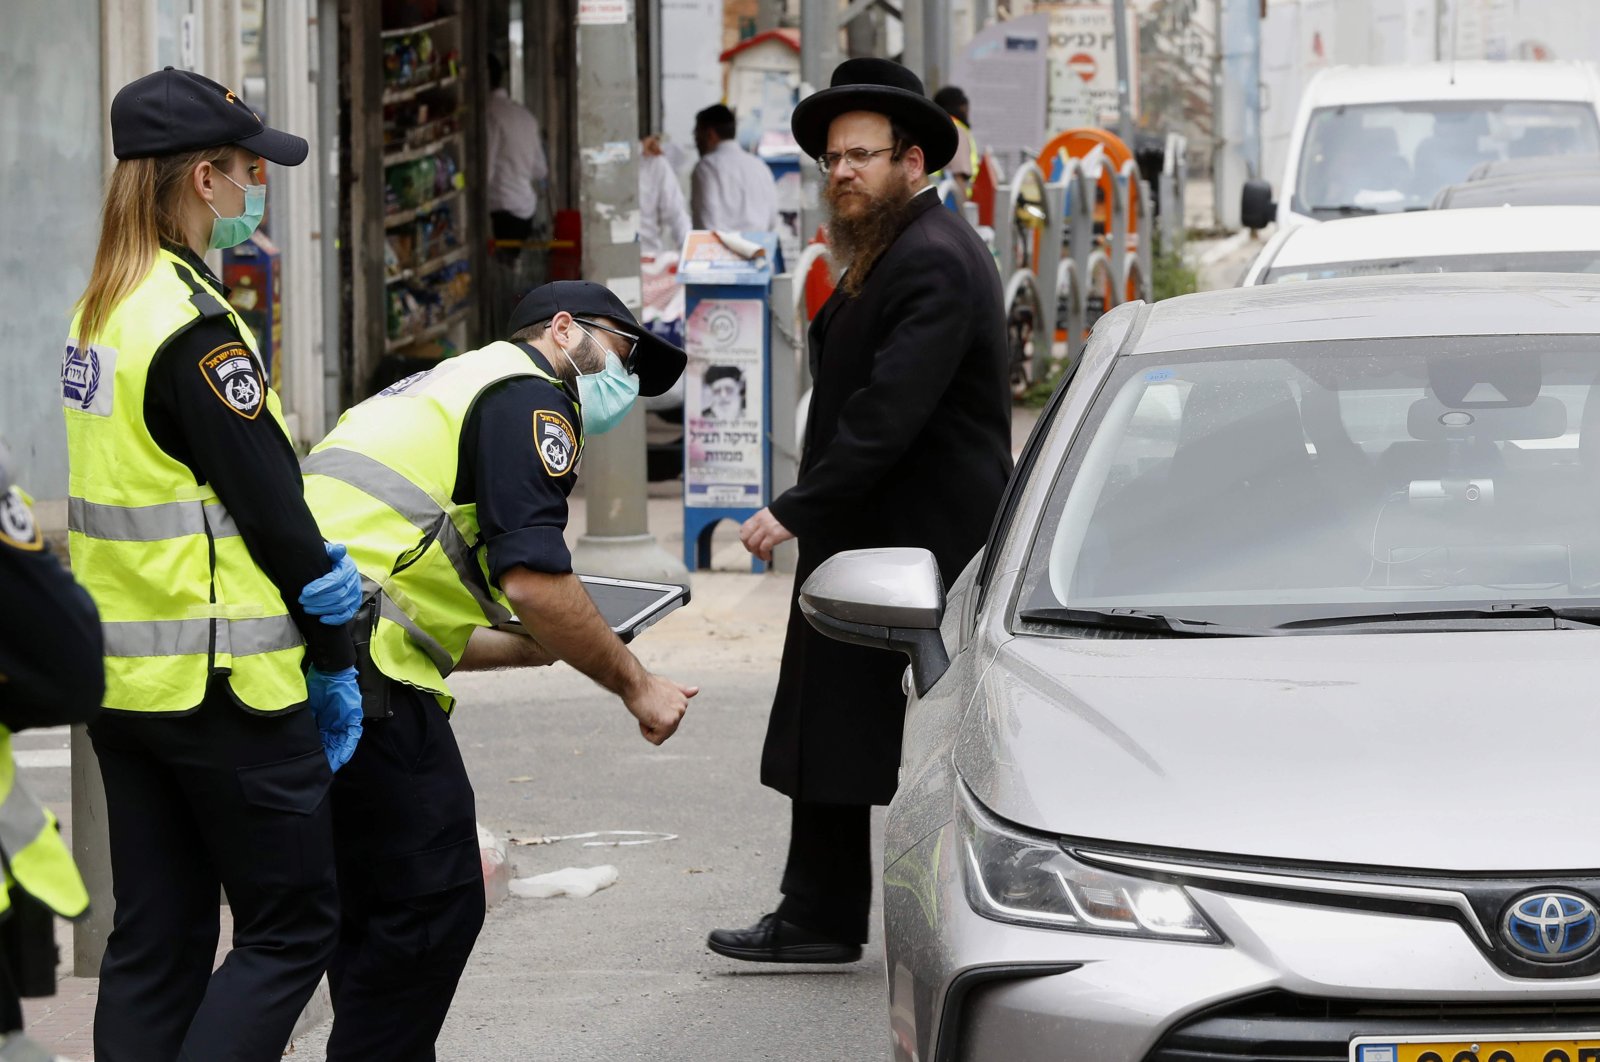 Israeli police talk to a driver at a checkpoint in the city of Bnei Brak, a city near Tel Aviv with a largely ultra-Orthodox population, part of measures imposed by Israeli authorities to curb the spread of COVID-19, Tuesday, March 31, 2020. (AFP Photo)